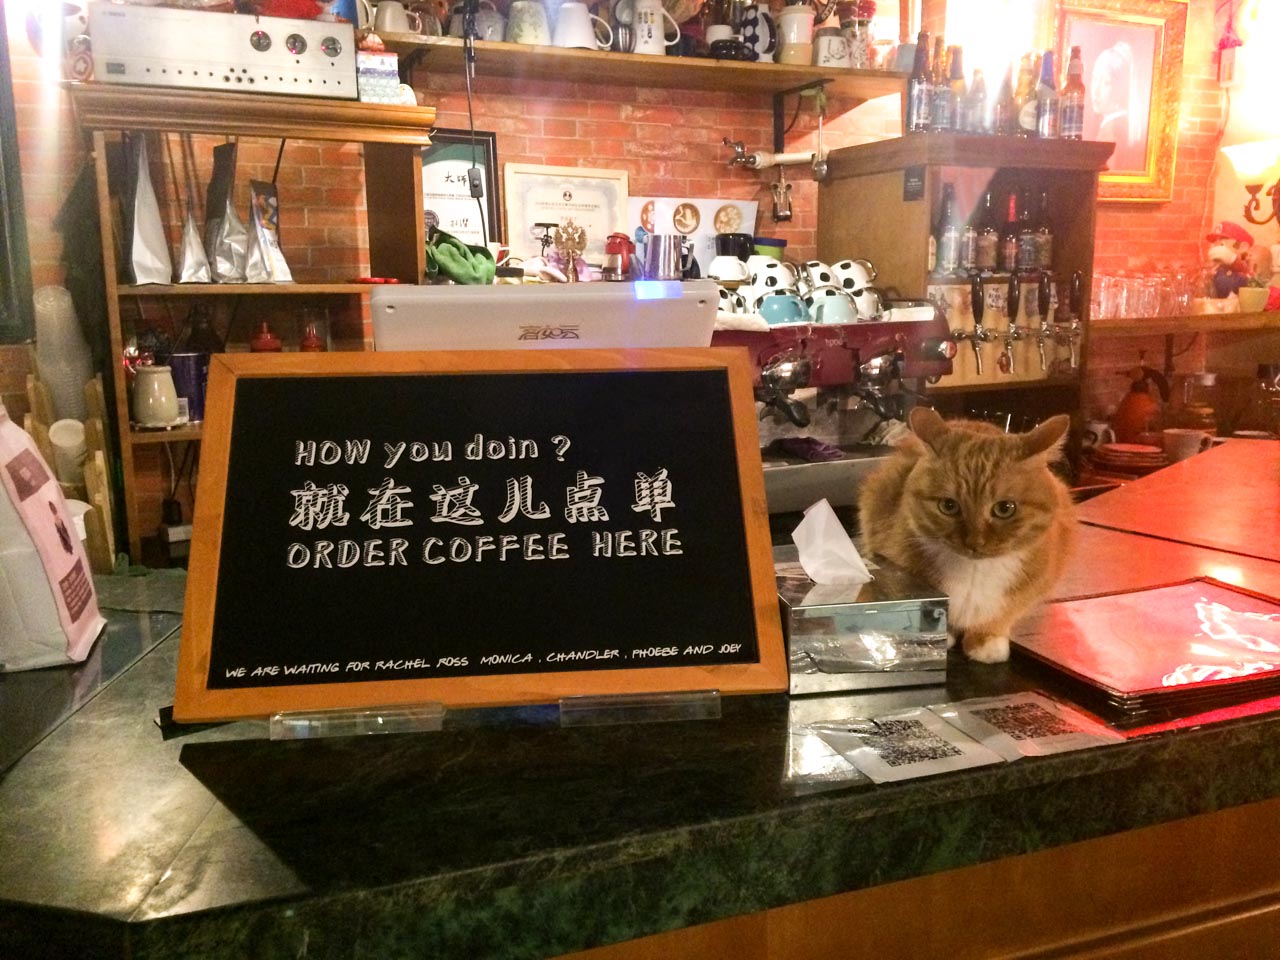 Ginger tabby cat sitting on the counter next to a sign that says "How you doin'? Order coffee here"